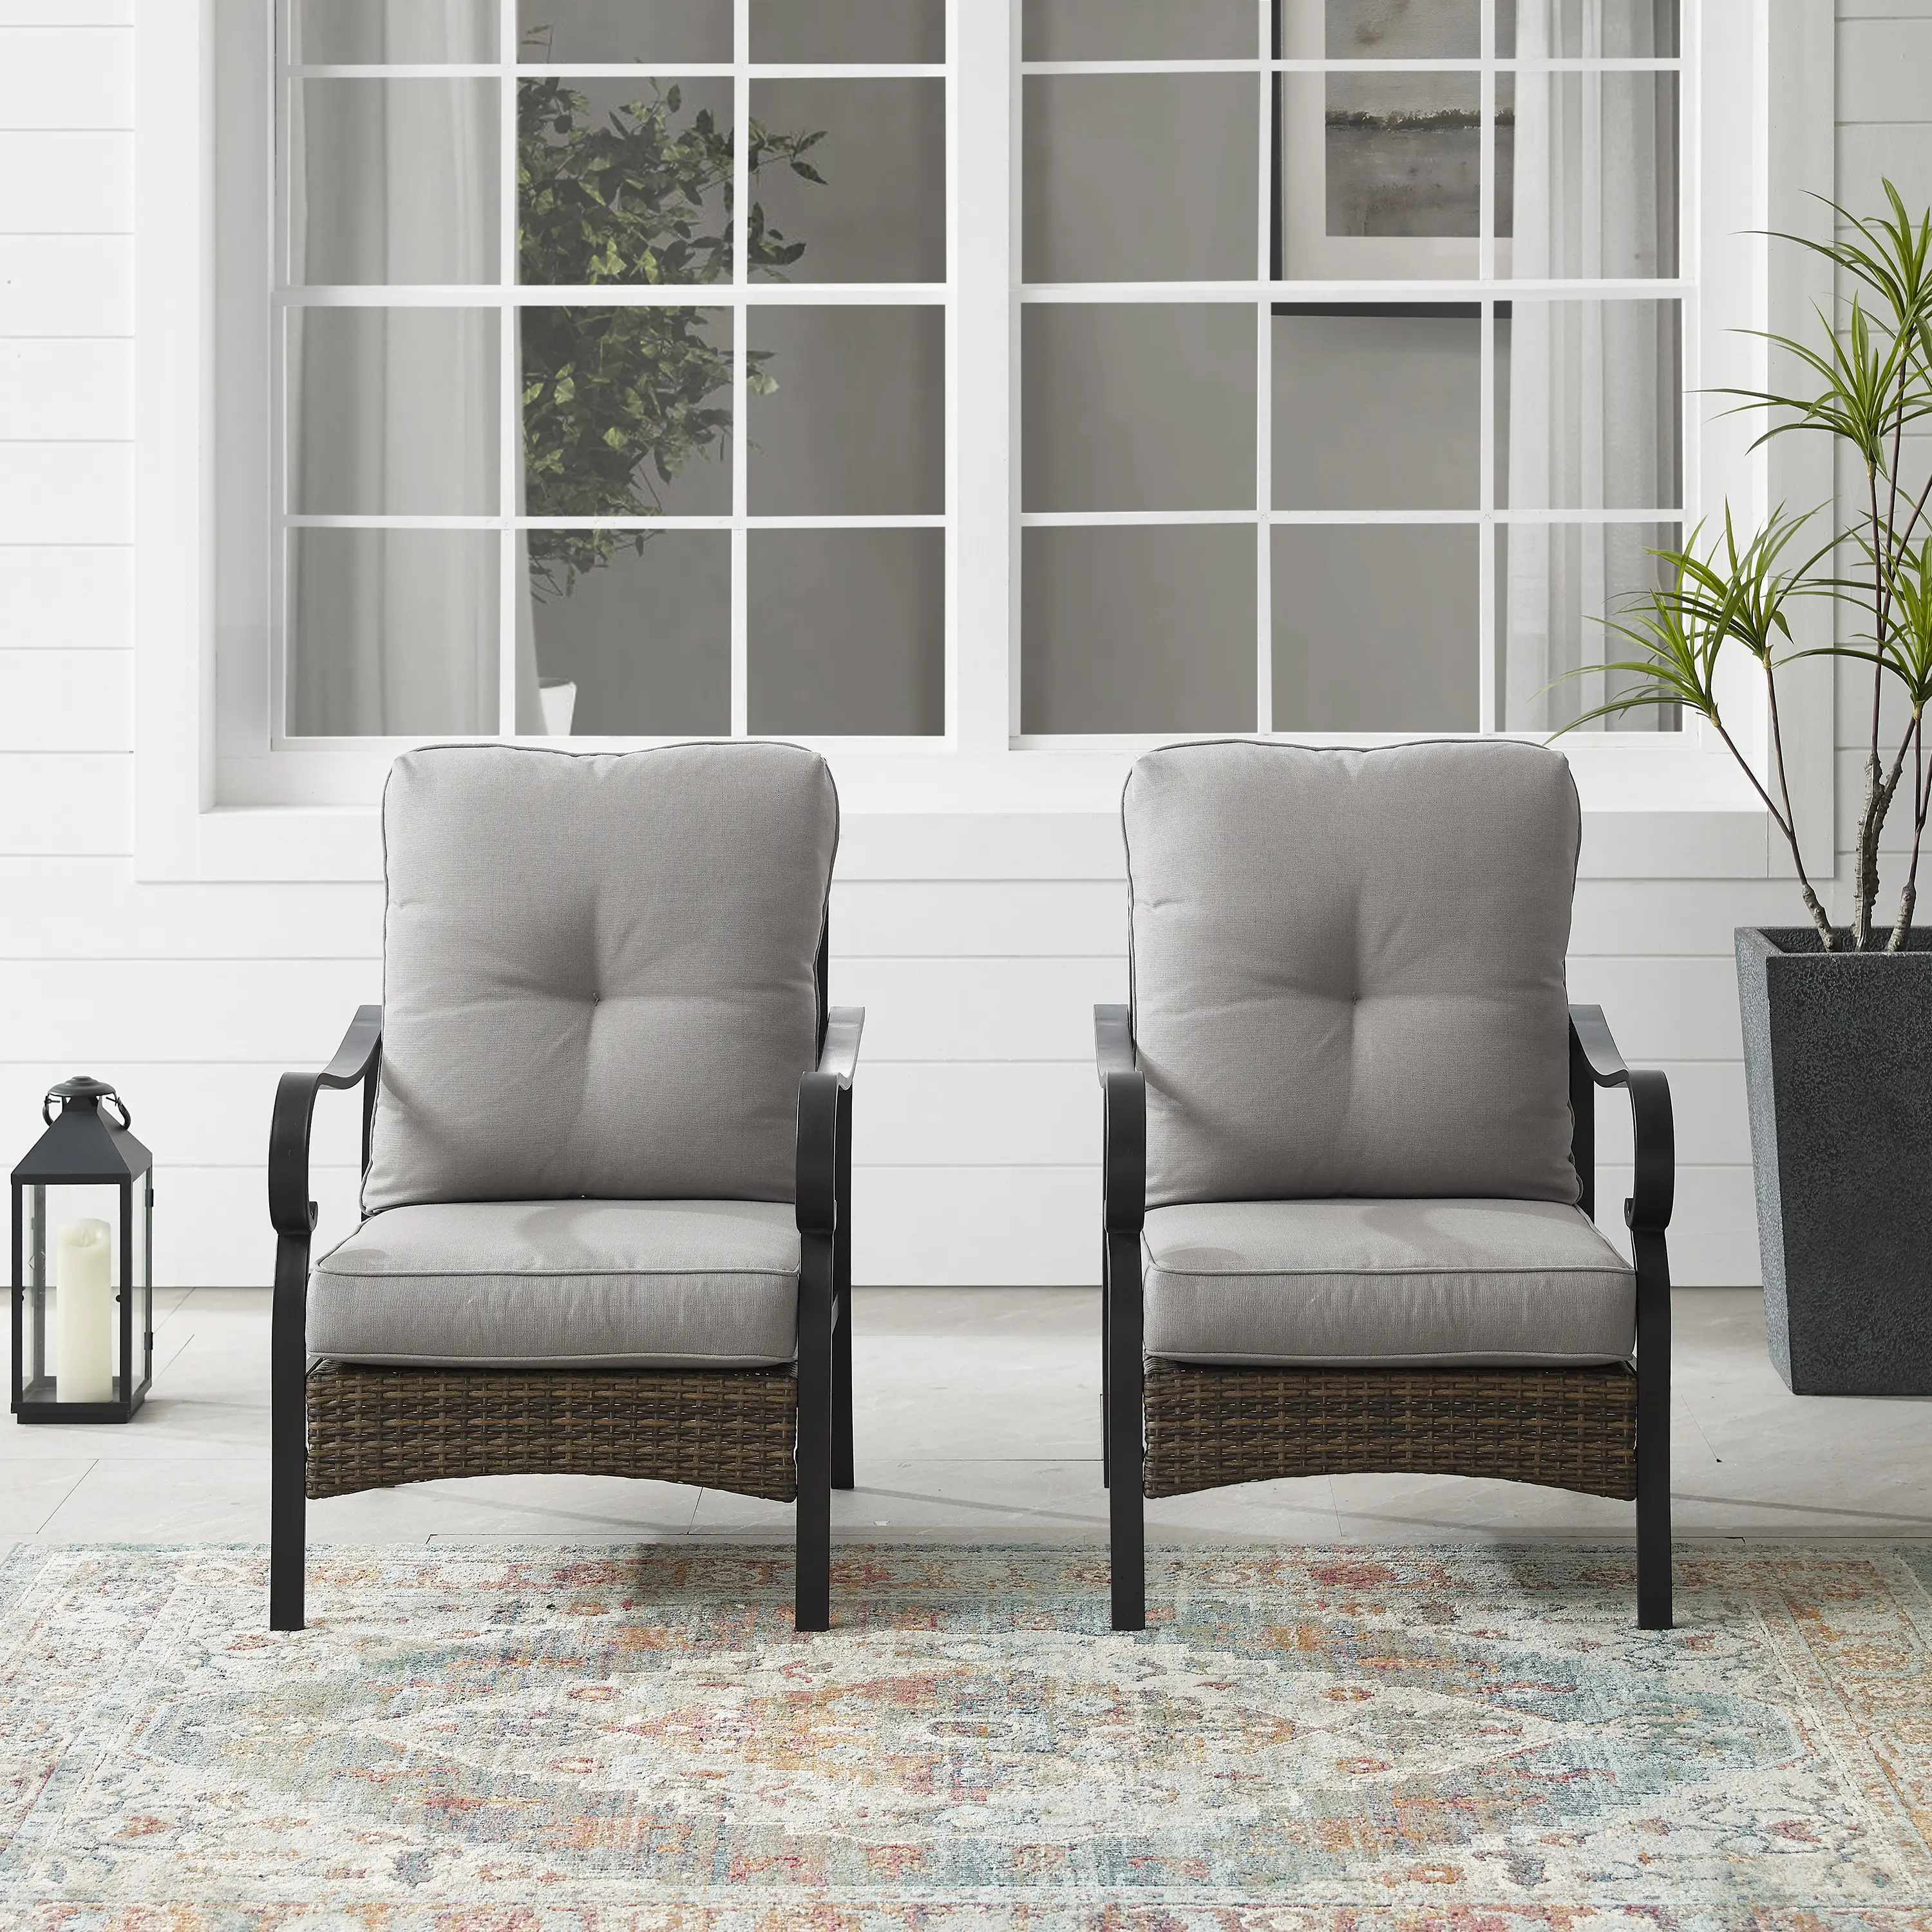 Dahlia Metal and Wicker Patio Armchairs, Set of 2